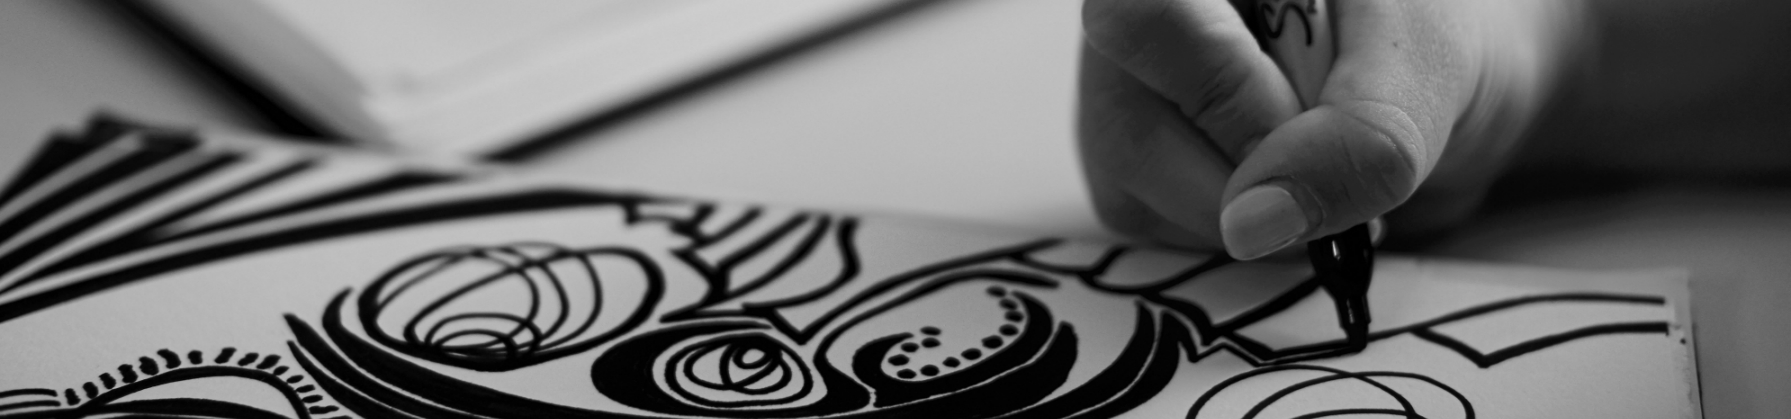 A hand is drawing a design on paper with a black sharpie marker.